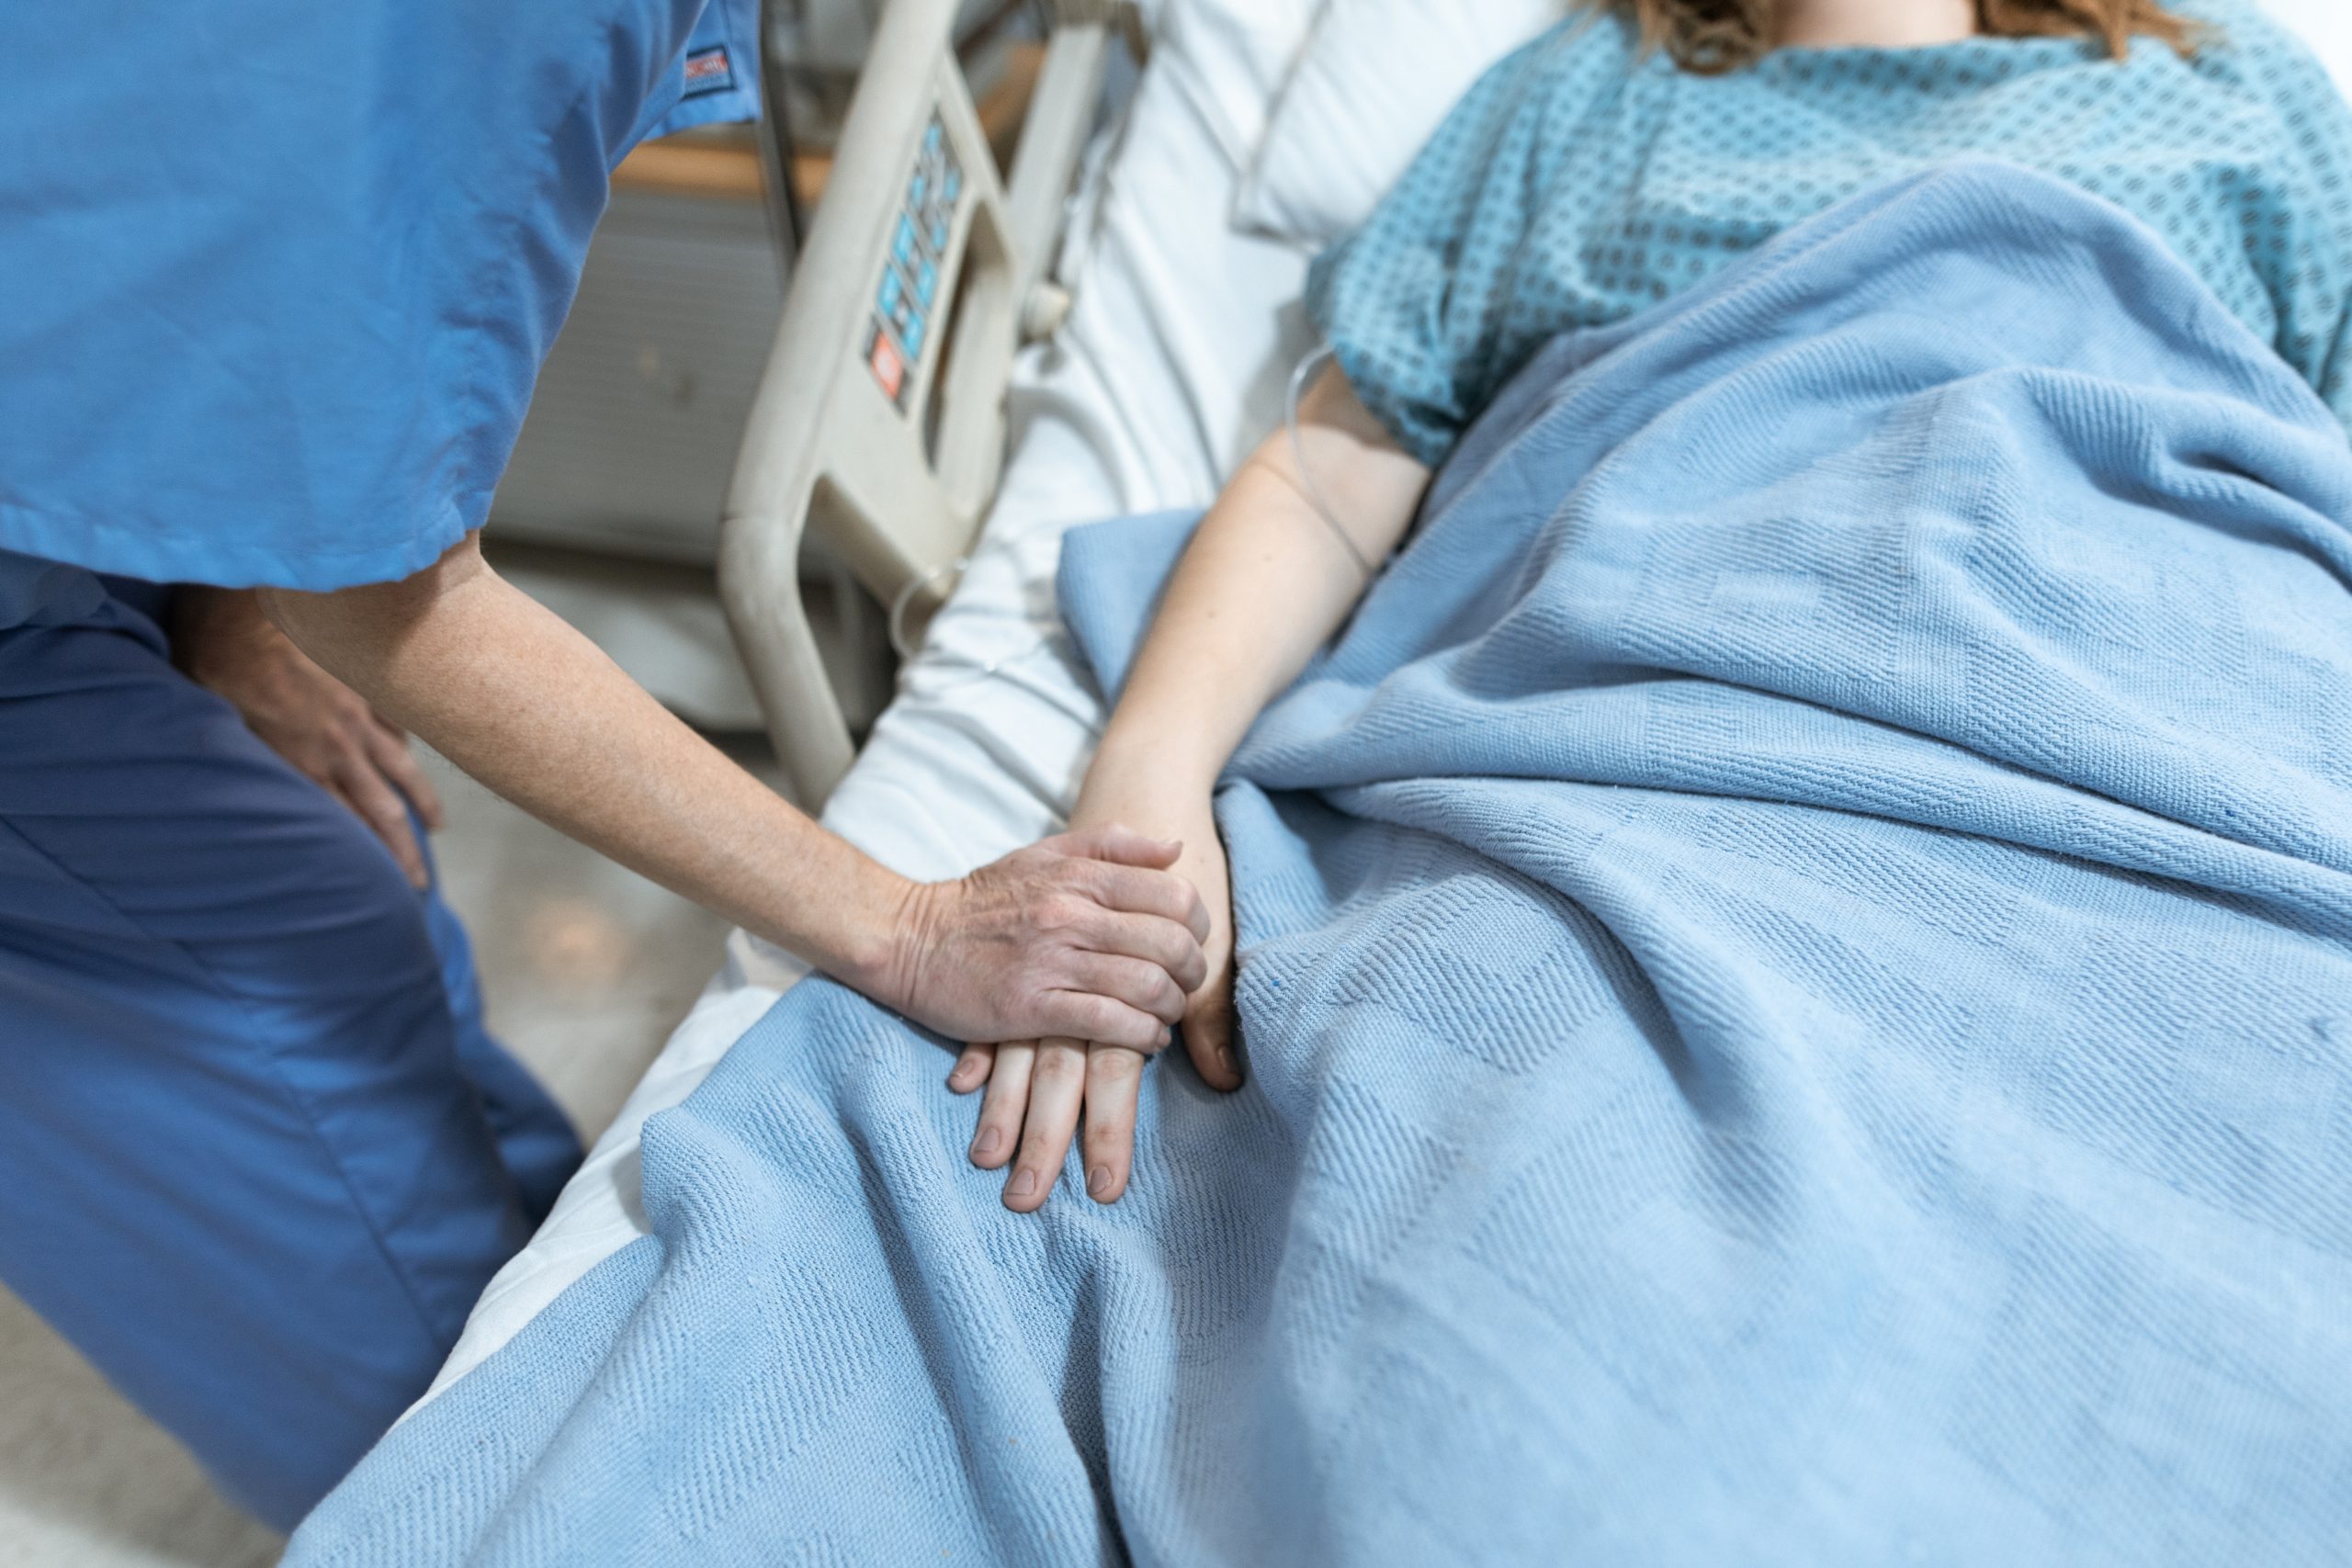 woman in scrub suit leans holds hand of a young patient lying in a hospital bed. The patient is wearing a gown and has a blanket.